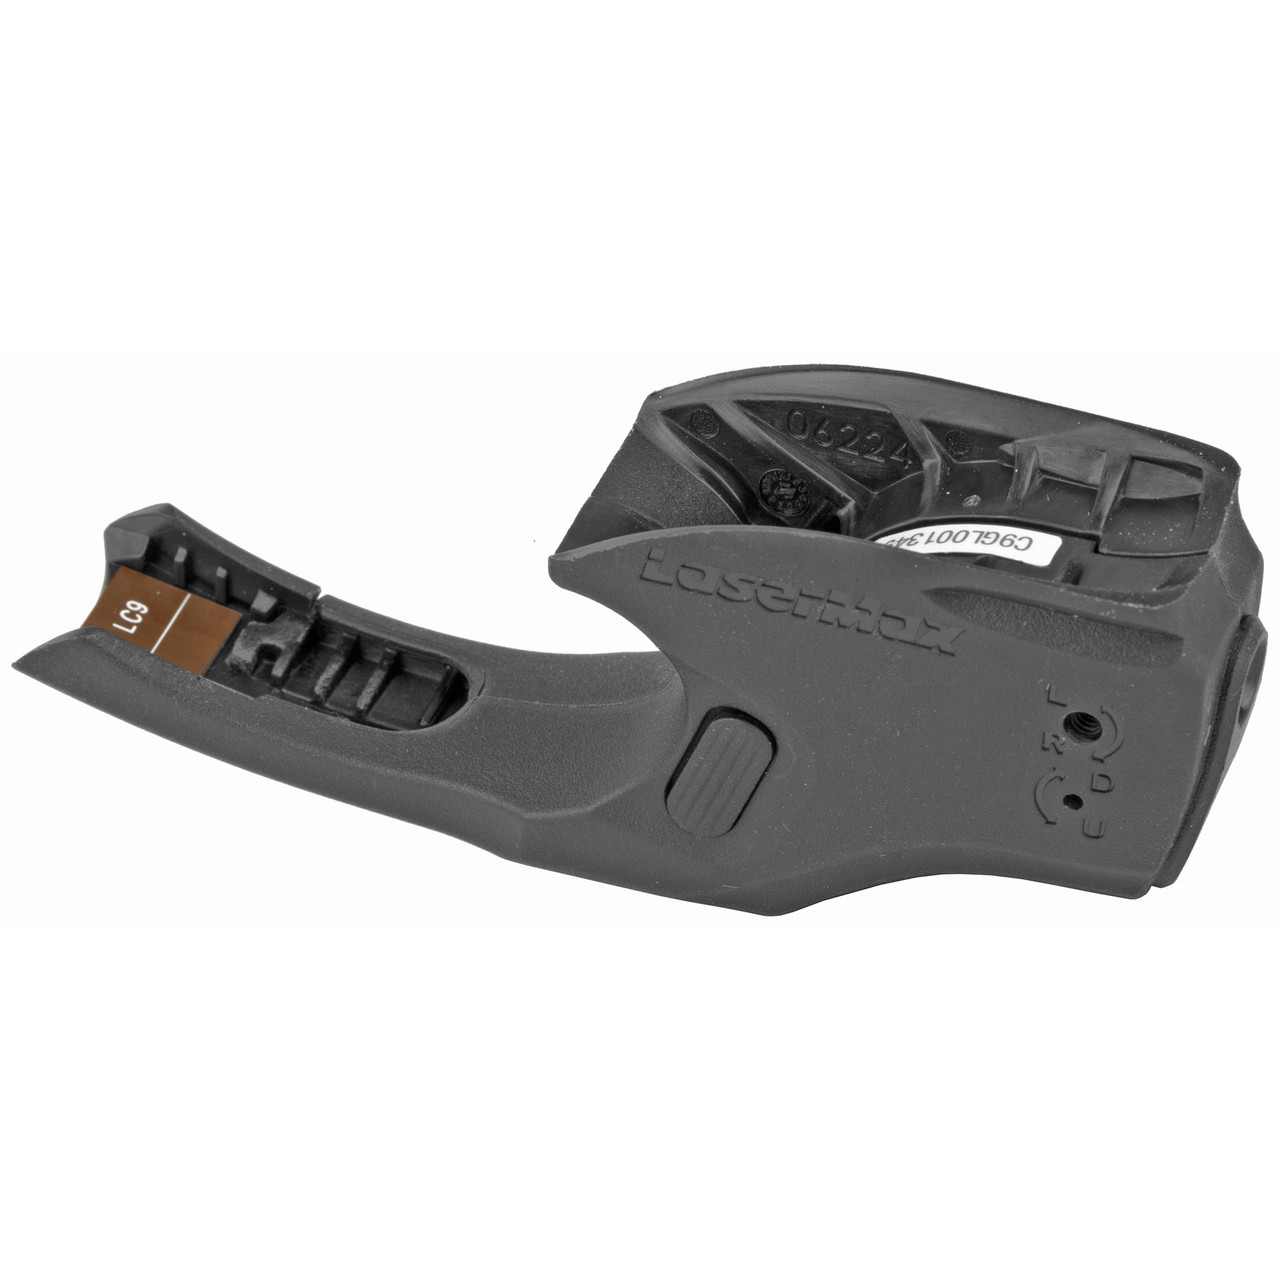 LaserMax Ruger CenterFire Laser For LCP - 0.50 Oz